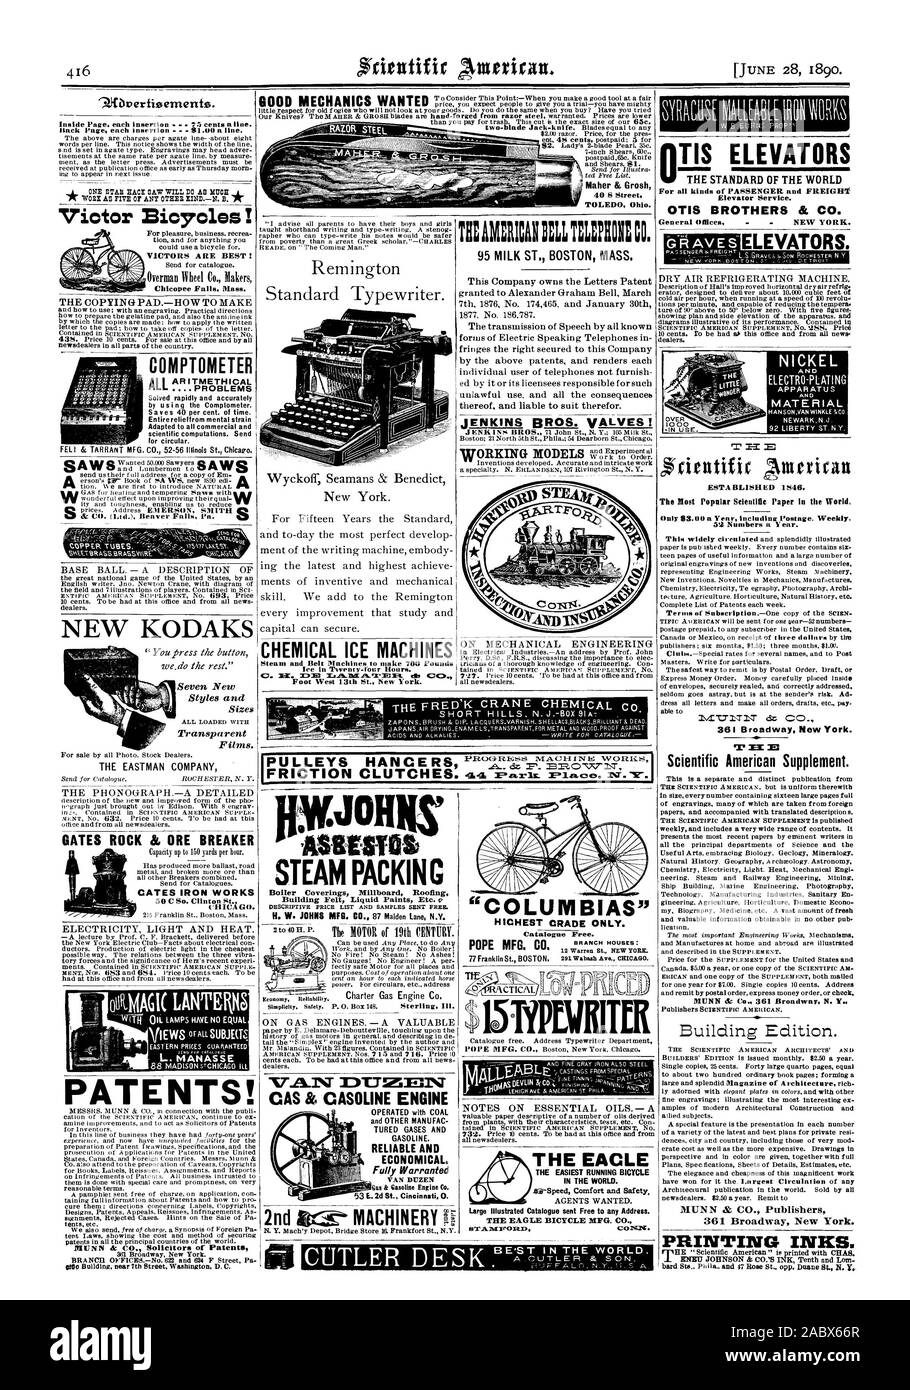 TOLED Ohio. Victor Bicycles! COMPTOMETER  PROBLEMS NEW KODAKS THE EASTMAN COMPANY GATES ROCK & ORE BREAKER CATES IRON WORKS CHICAGO. PATENTS! CHEMICAL ICE MACHINES Steam and Belt Machines to make 700 Pounds Foot West 13th St. New York. Autism STEAM PACKING Ito 40 H. P. RELIABLE AND ECONOMICAL. Fully Warranted I VAN DUZEN THIAM:RICAIBMILININBCO. JENKINS BROS. VALVES! THE EACLE oIRMAGIC LANTERN ioilANASSE ' e WORKING MODELS BRANCH HOUSES: 12 Warren St. NEW YORK. POPE MFG. CO. 145 NEVE THE STANDARD OF THE WORLD For all kinds of PASSENGER and FREIGHT Elevator Service. OTIS BROTHERS & CO. General Stock Photo